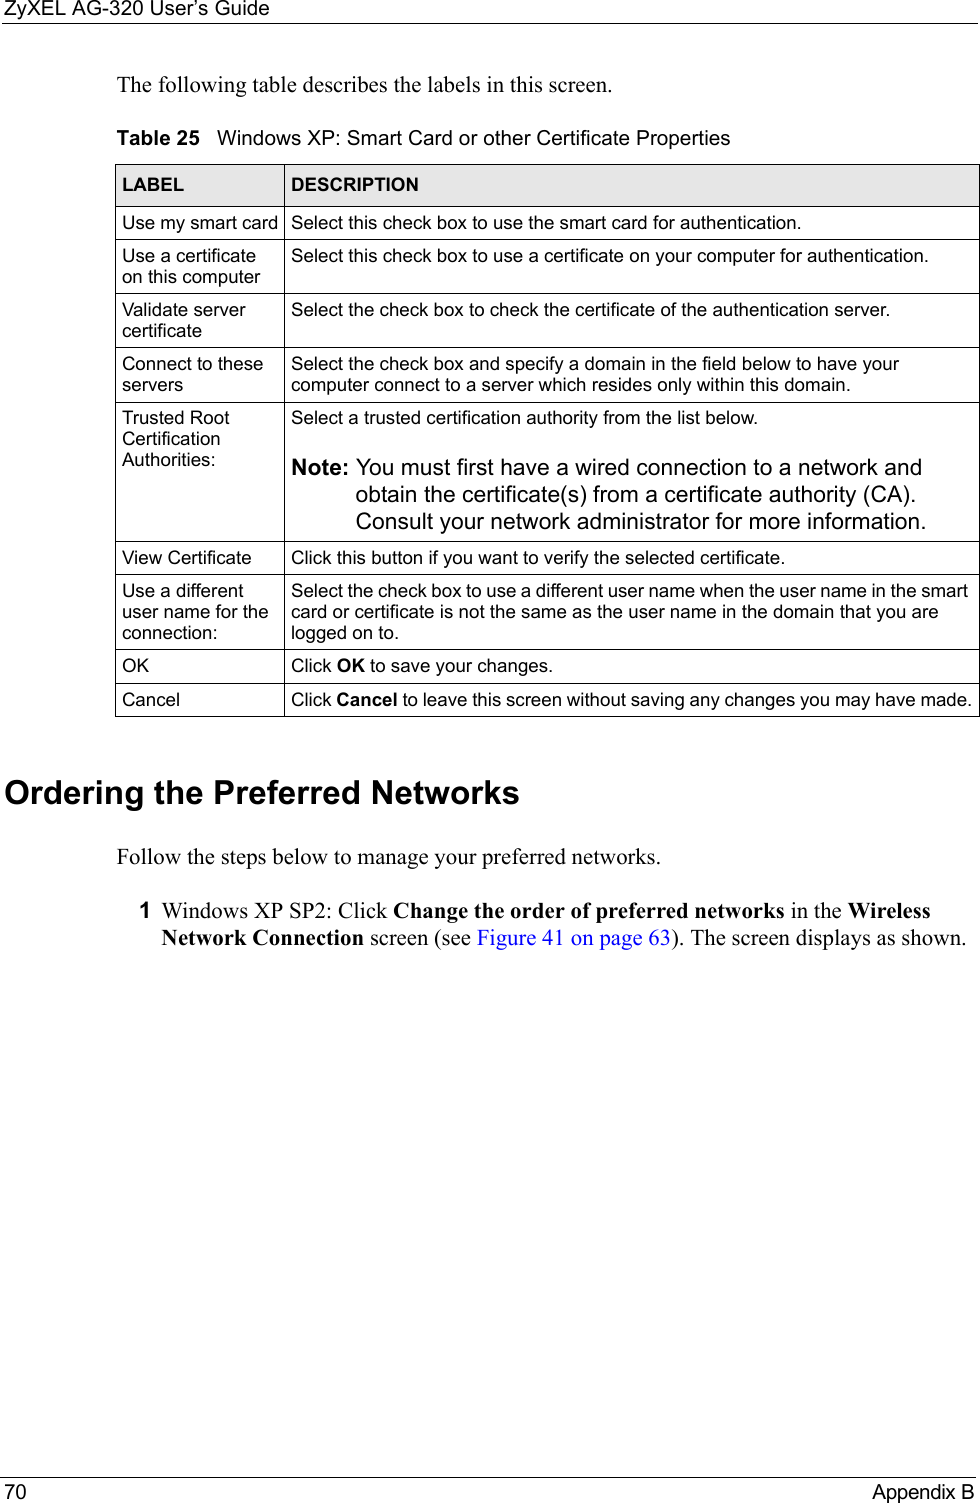 ZyXEL AG-320 User’s Guide70 Appendix BThe following table describes the labels in this screen.Ordering the Preferred NetworksFollow the steps below to manage your preferred networks.1Windows XP SP2: Click Change the order of preferred networks in the Wireless Network Connection screen (see Figure 41 on page 63). The screen displays as shown. Table 25   Windows XP: Smart Card or other Certificate PropertiesLABEL DESCRIPTIONUse my smart card Select this check box to use the smart card for authentication.Use a certificate on this computerSelect this check box to use a certificate on your computer for authentication.Validate server certificateSelect the check box to check the certificate of the authentication server.Connect to these serversSelect the check box and specify a domain in the field below to have your computer connect to a server which resides only within this domain. Trusted Root Certification Authorities:Select a trusted certification authority from the list below.Note: You must first have a wired connection to a network and obtain the certificate(s) from a certificate authority (CA). Consult your network administrator for more information.View Certificate Click this button if you want to verify the selected certificate.Use a different user name for the connection:Select the check box to use a different user name when the user name in the smart card or certificate is not the same as the user name in the domain that you are logged on to.OK Click OK to save your changes.Cancel Click Cancel to leave this screen without saving any changes you may have made.